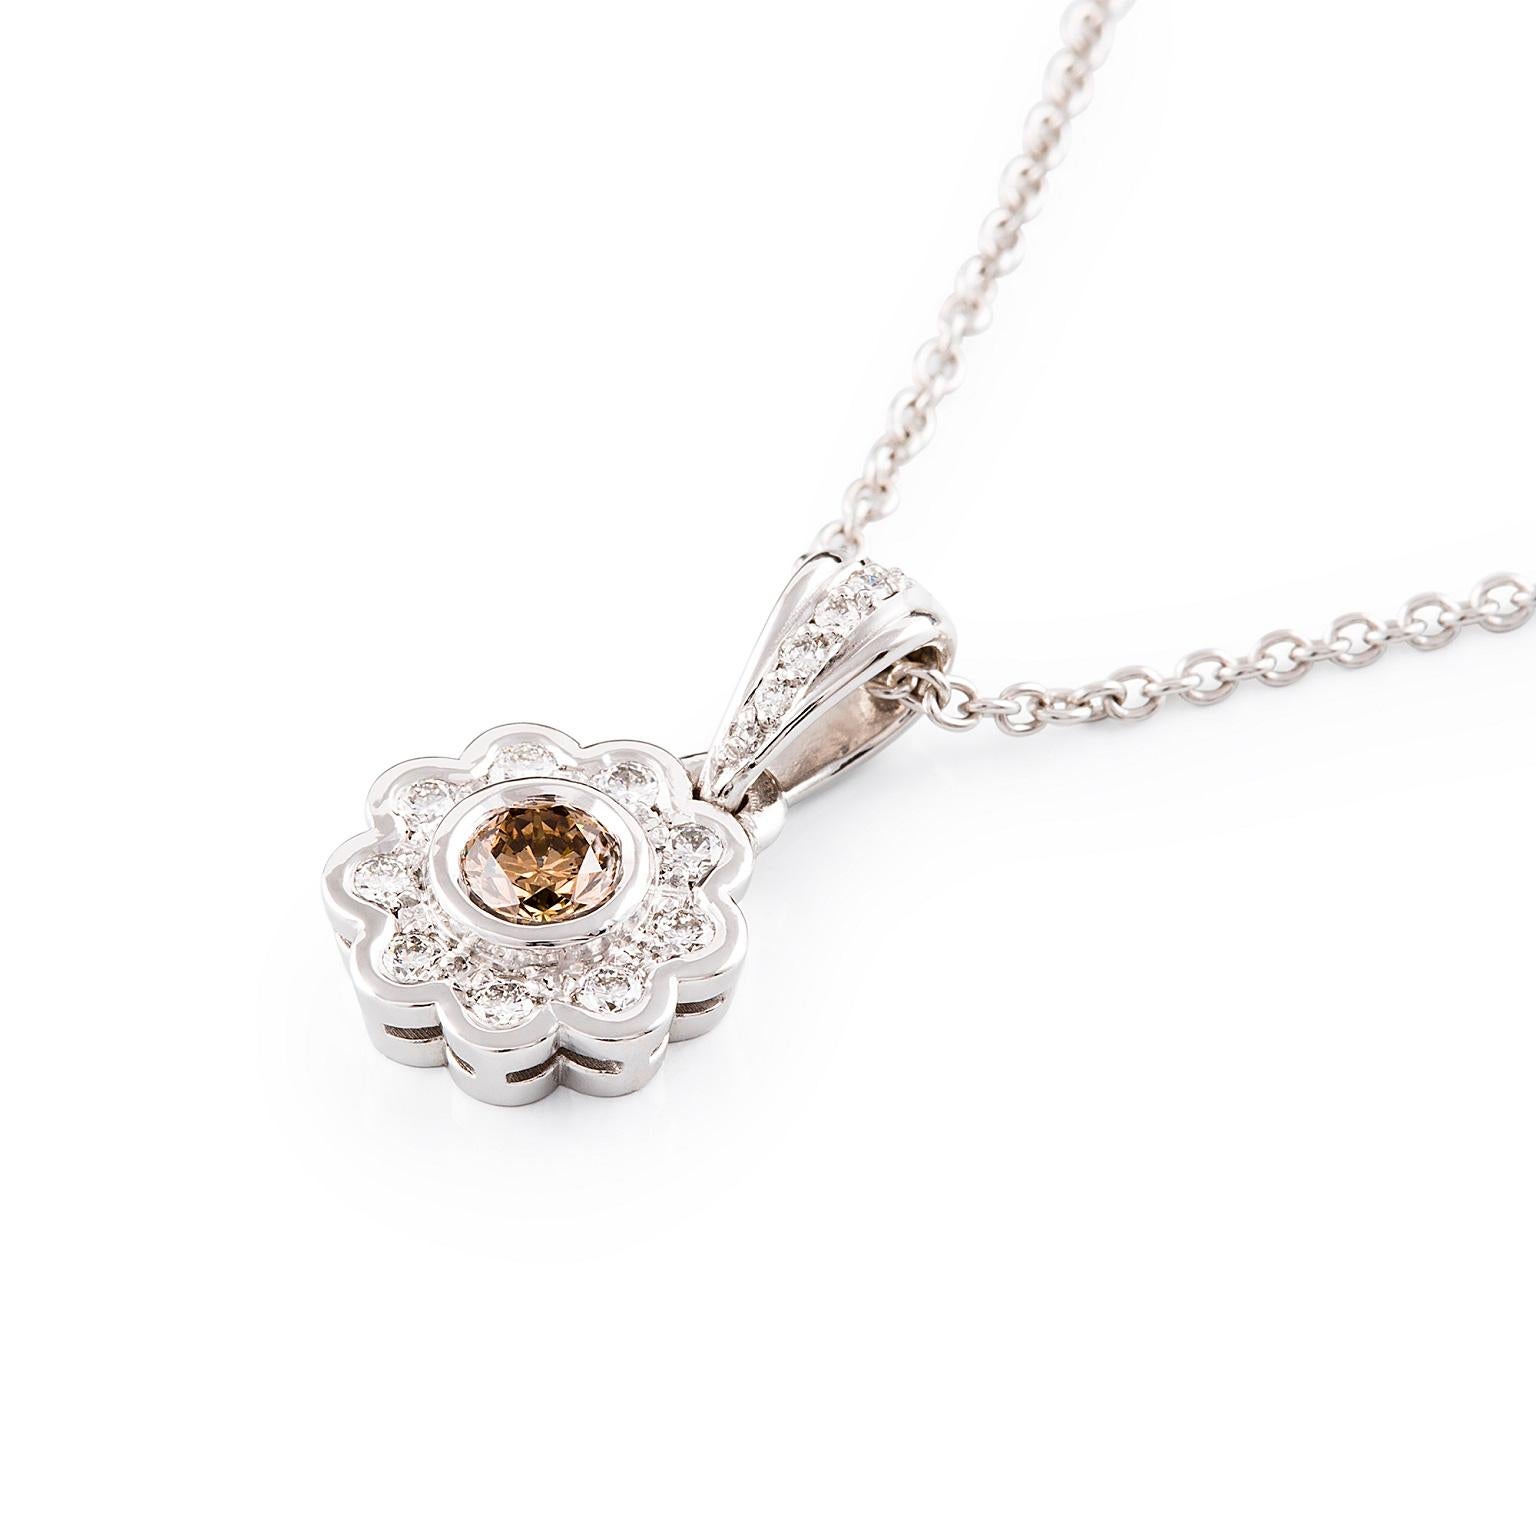 Halo Necklace

This gorgeous petite pendant features a stunning fancy Champagne(Golden brown) diamond surrounded by a halo of white diamonds. The fancy bail has a Bead  set diamonds and is threaded upon the 18 carat link chain.

Round brilliant cut